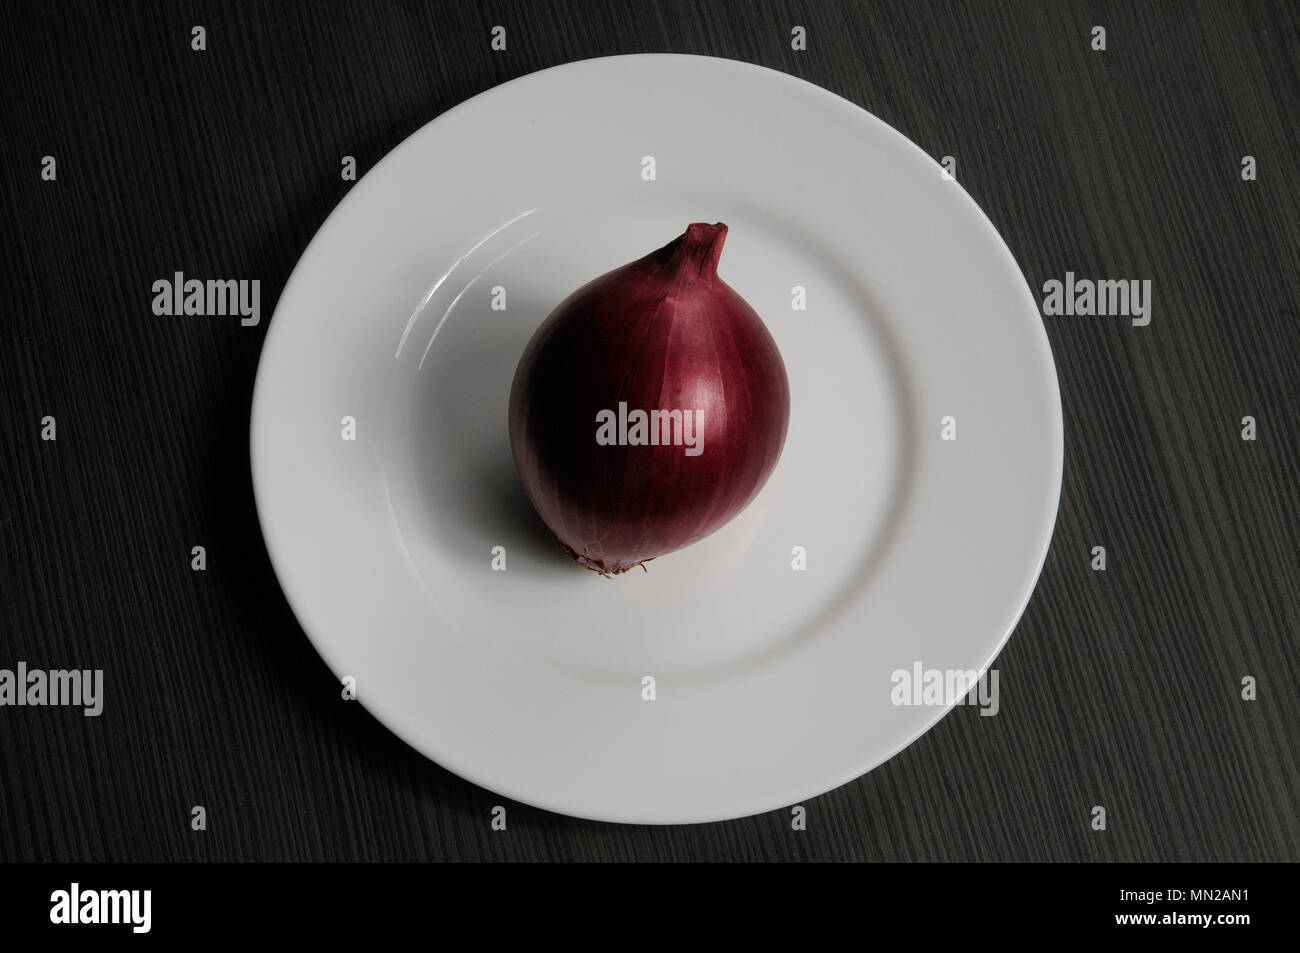 Red onion on the plate on wooden table Stock Photo